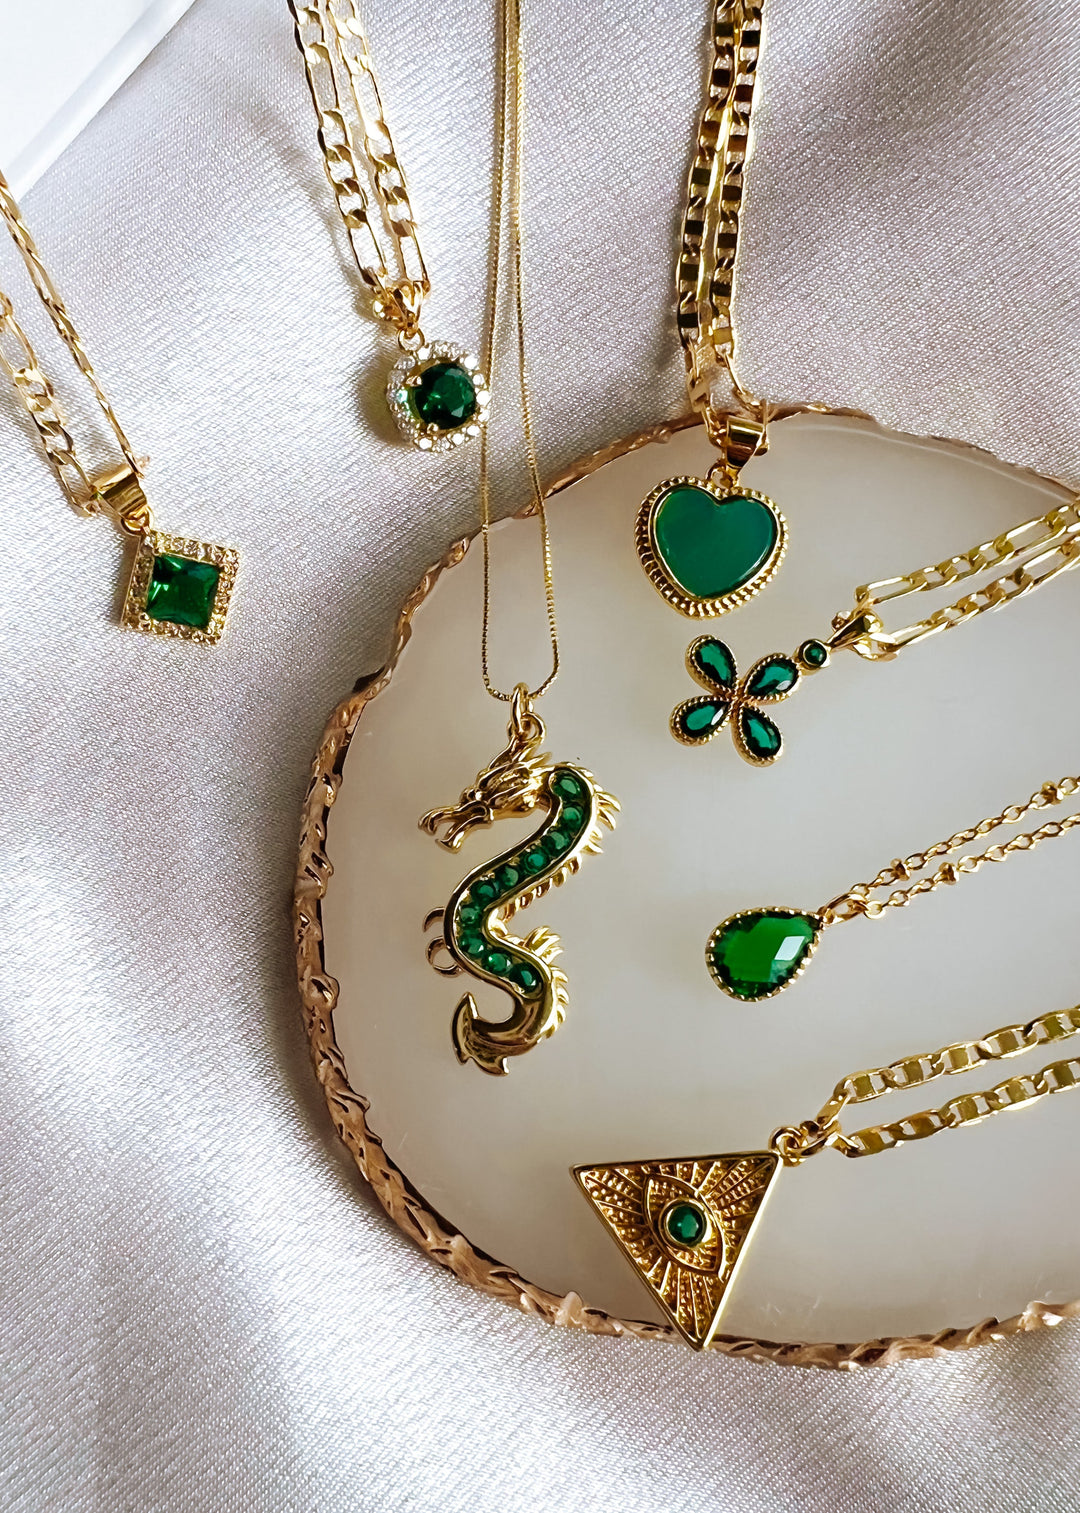 Green Heart Necklace - Gold Filled